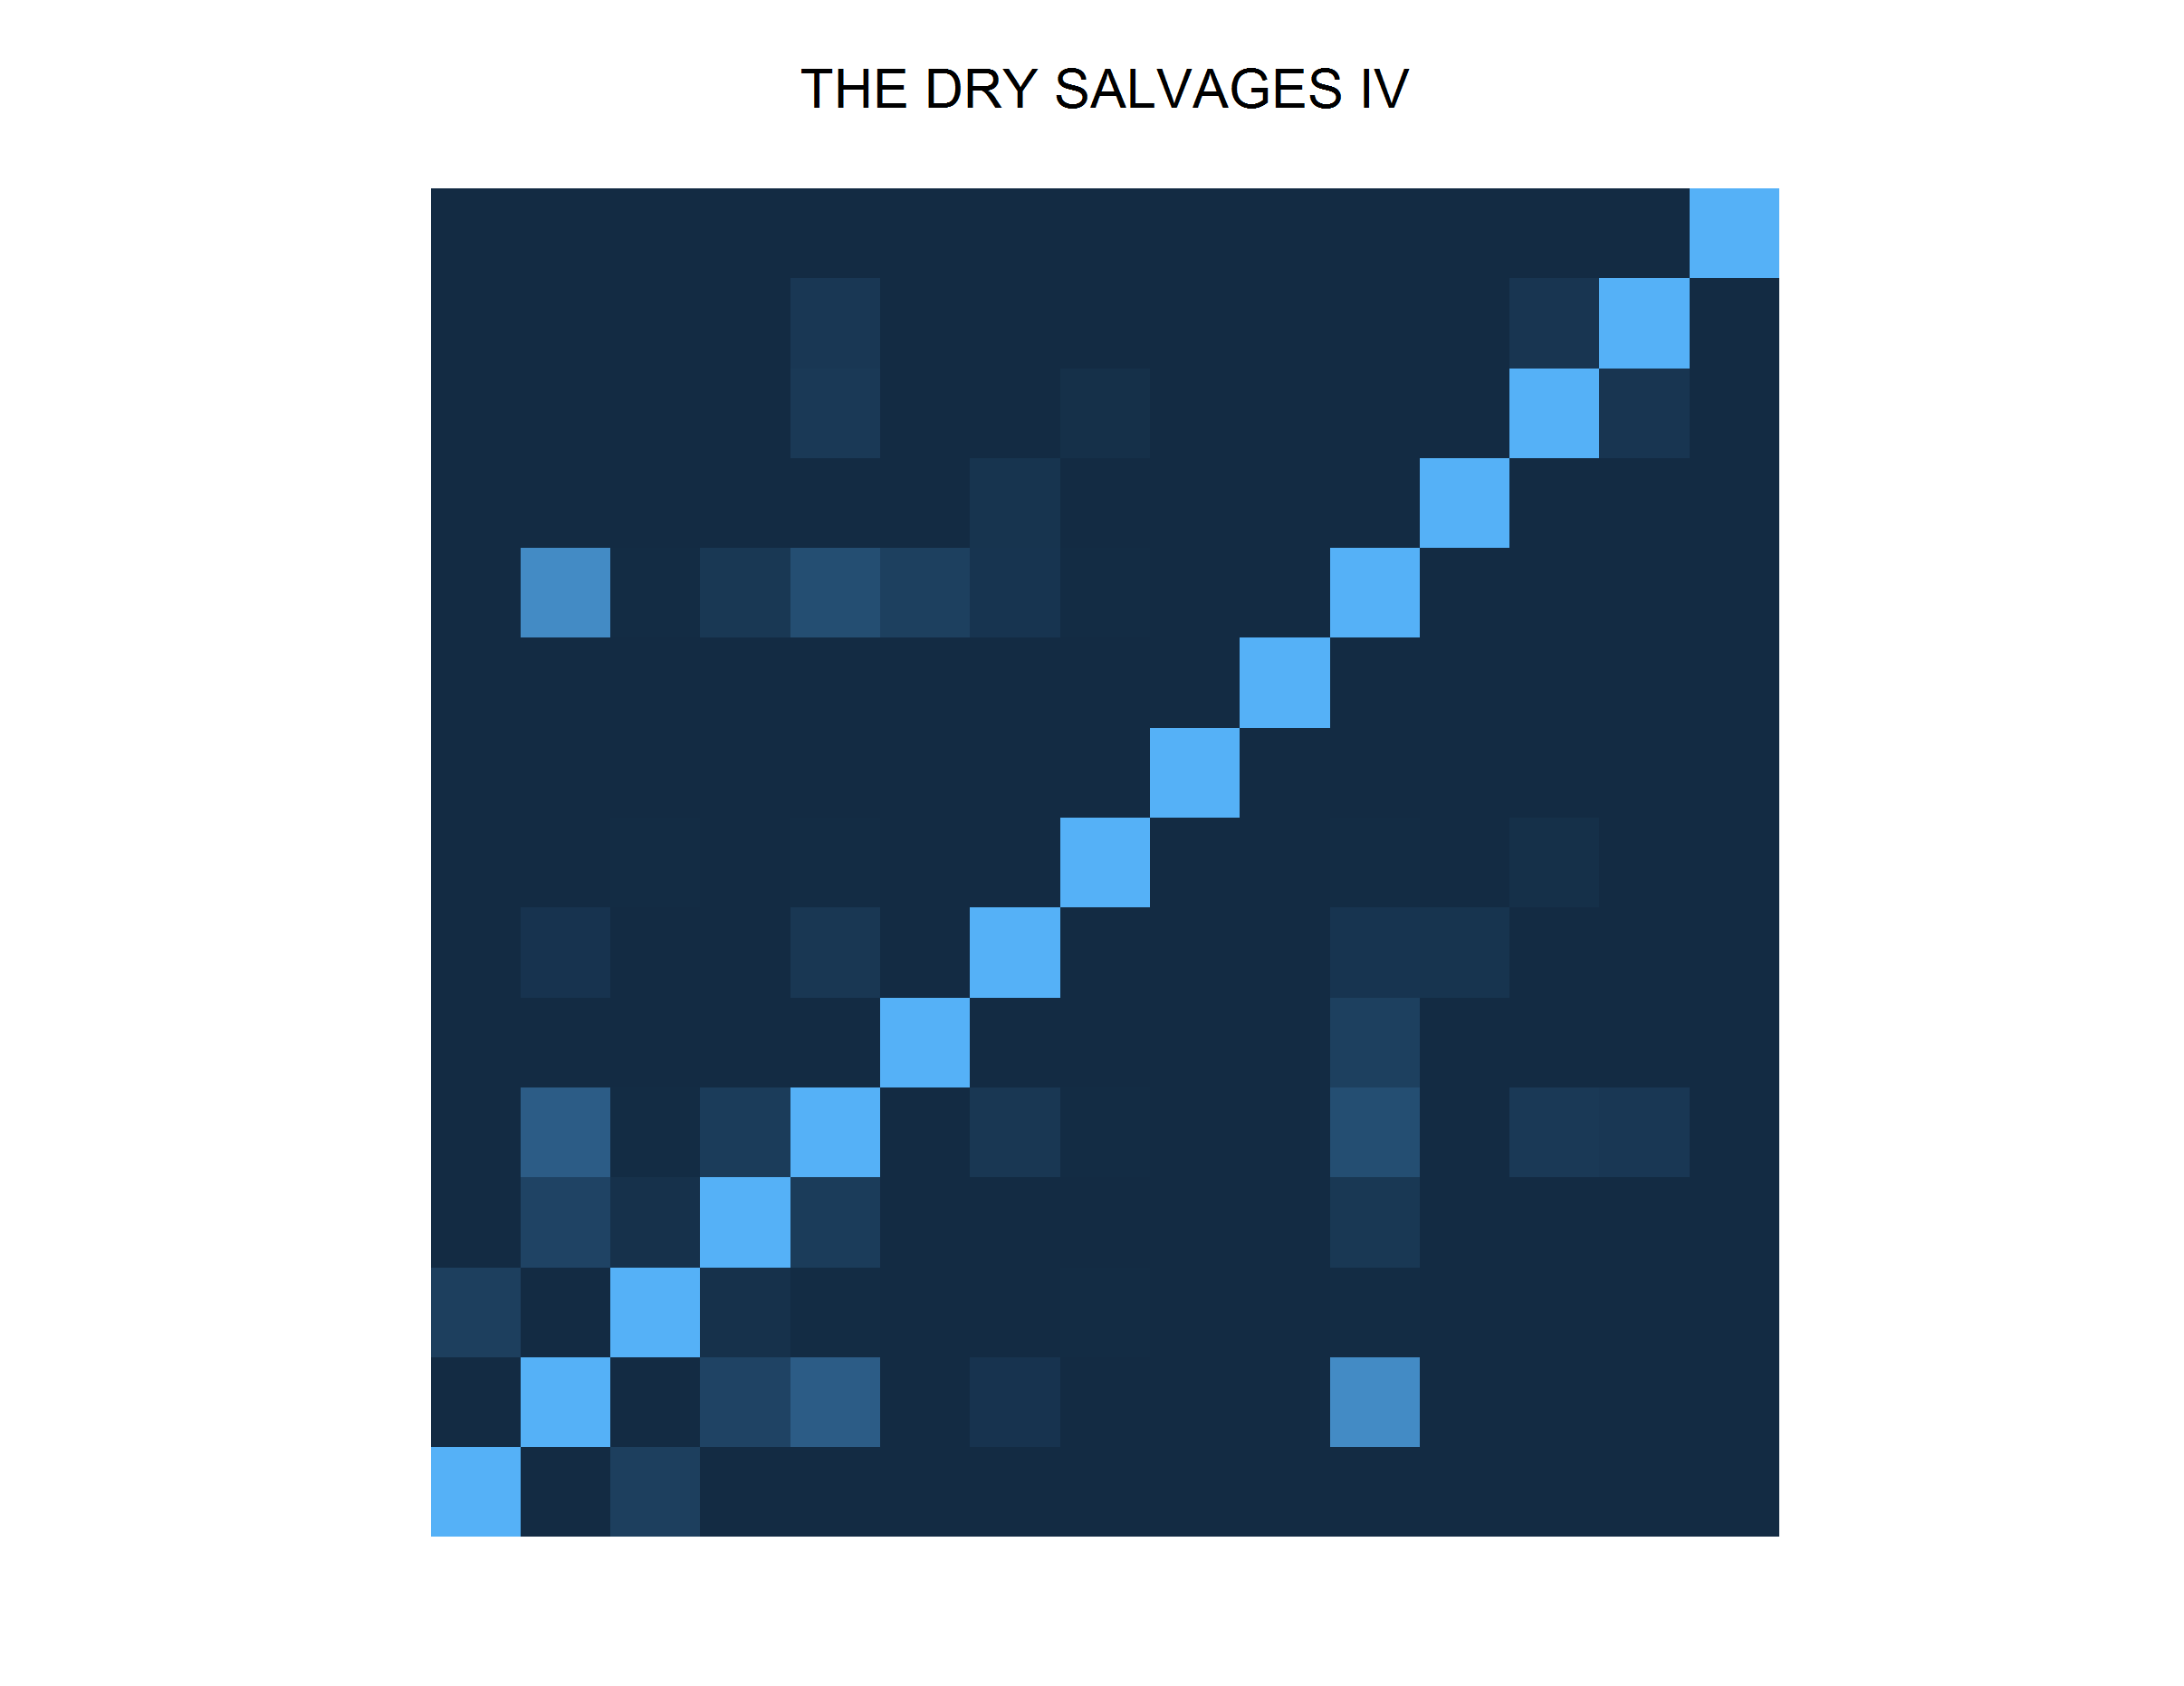 The Dry Salvages IV